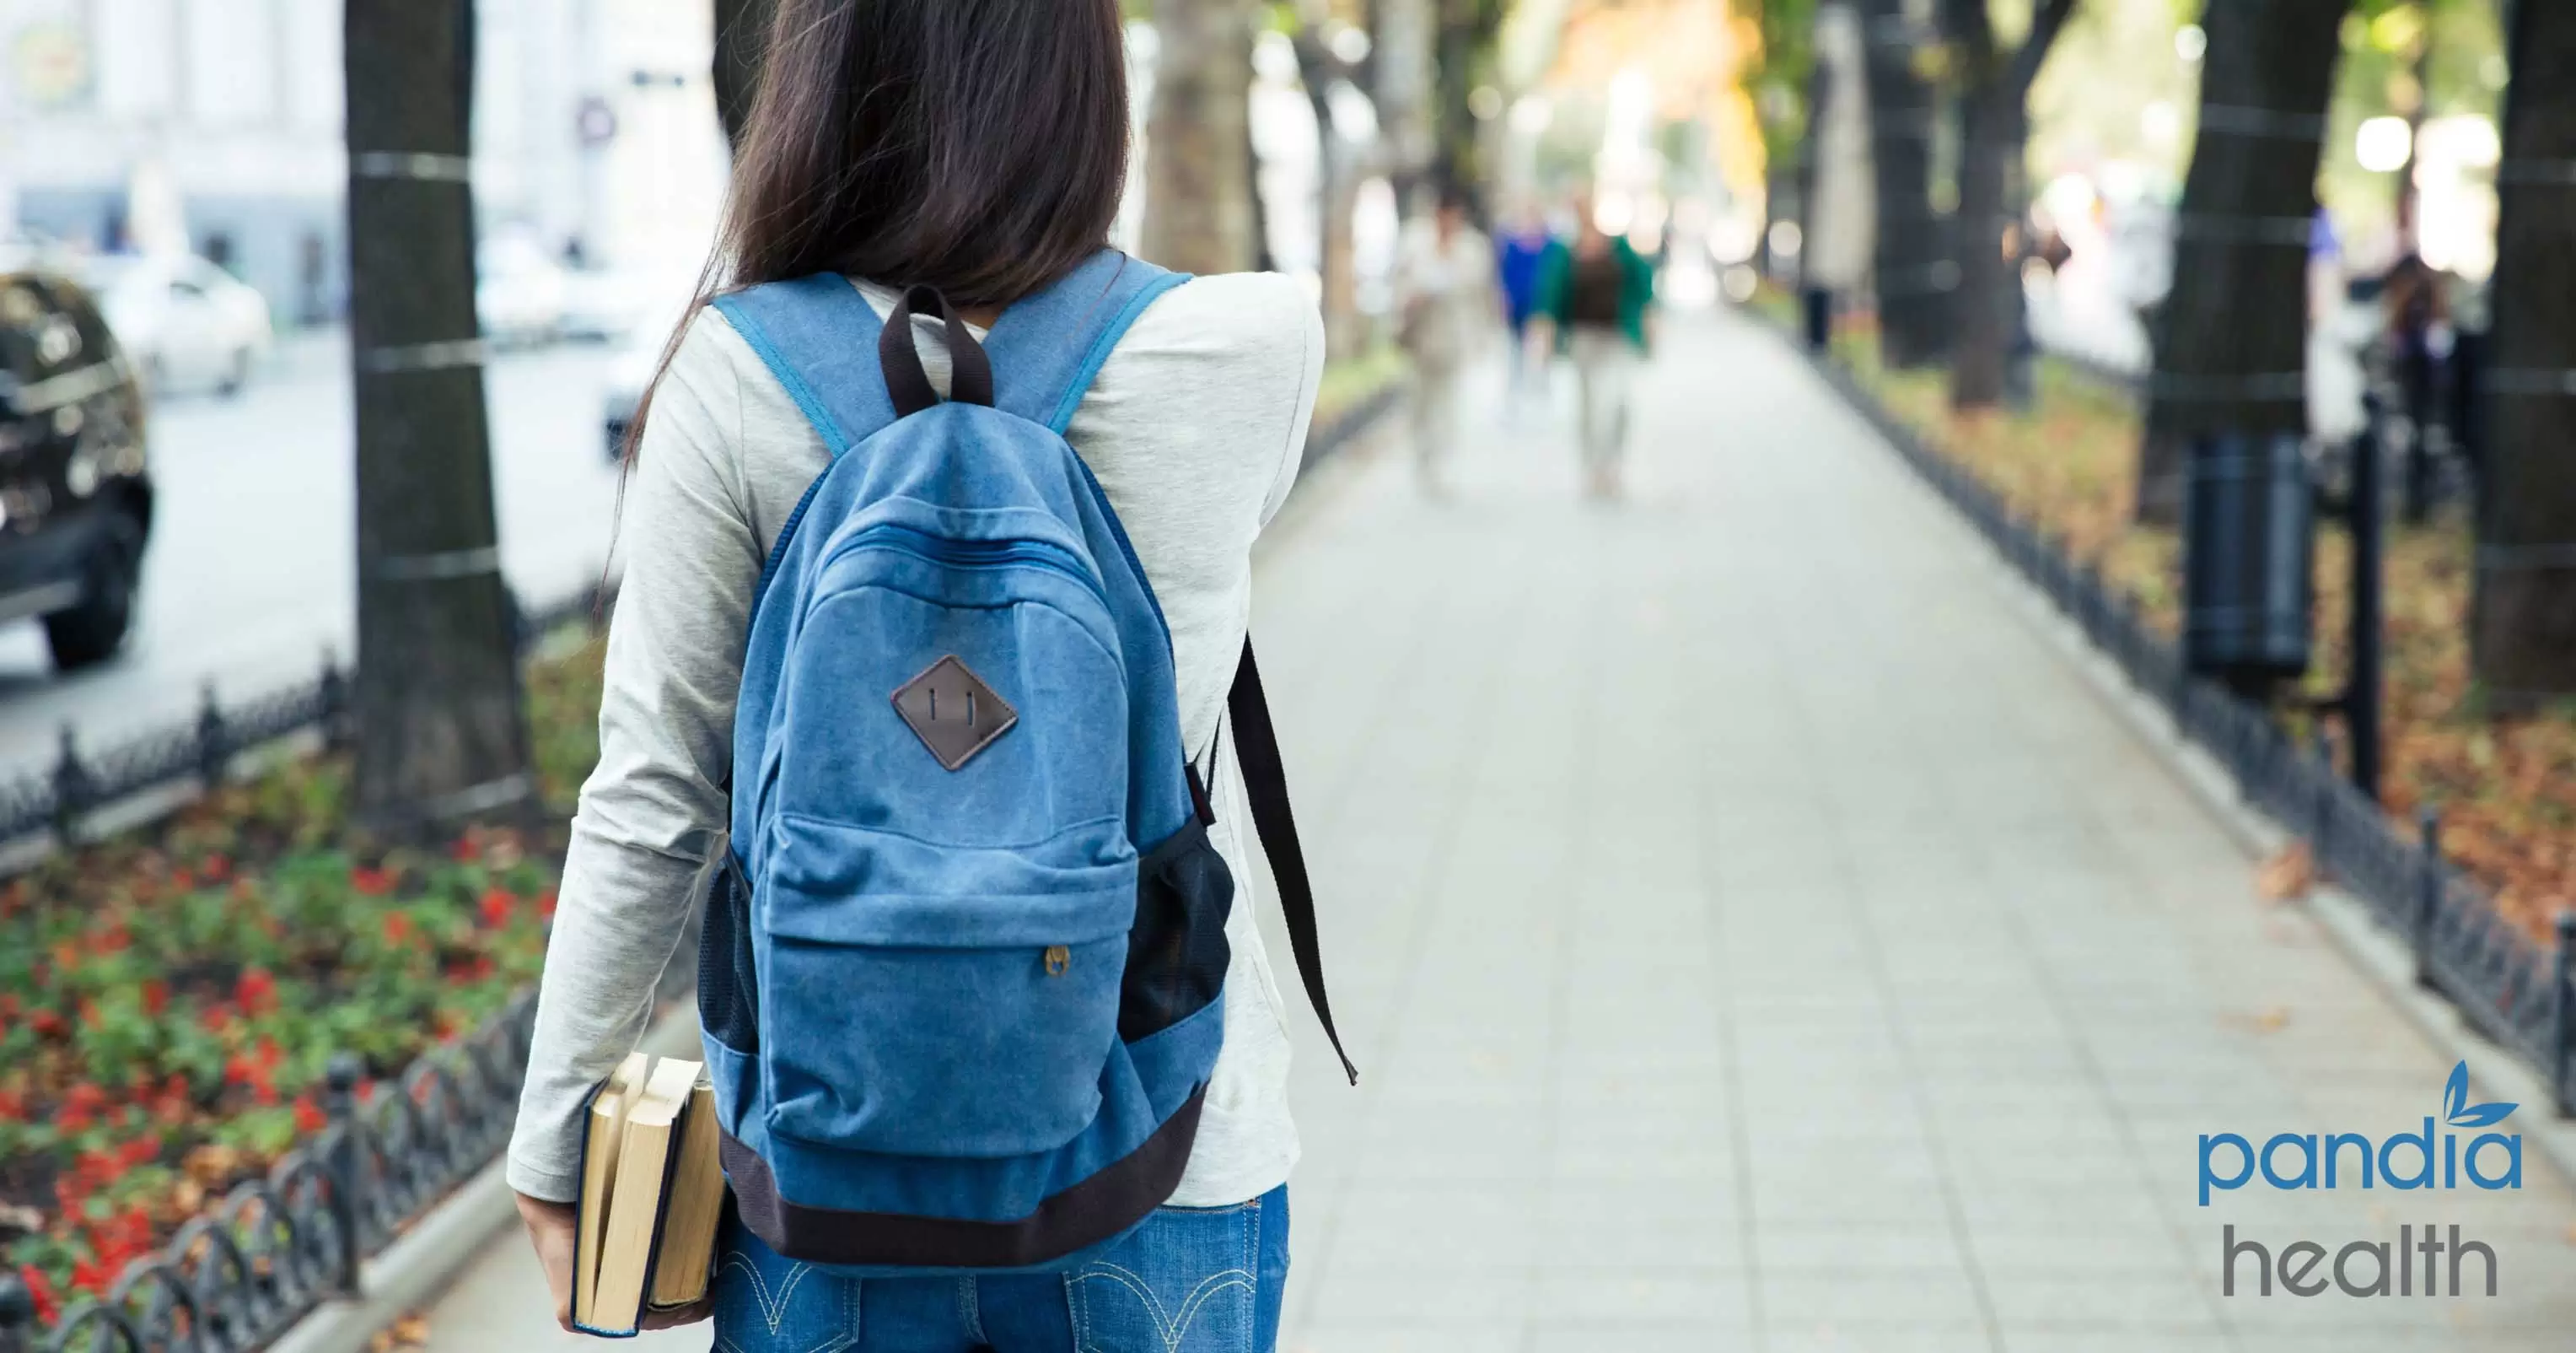 Woman walking with backpack and holding books